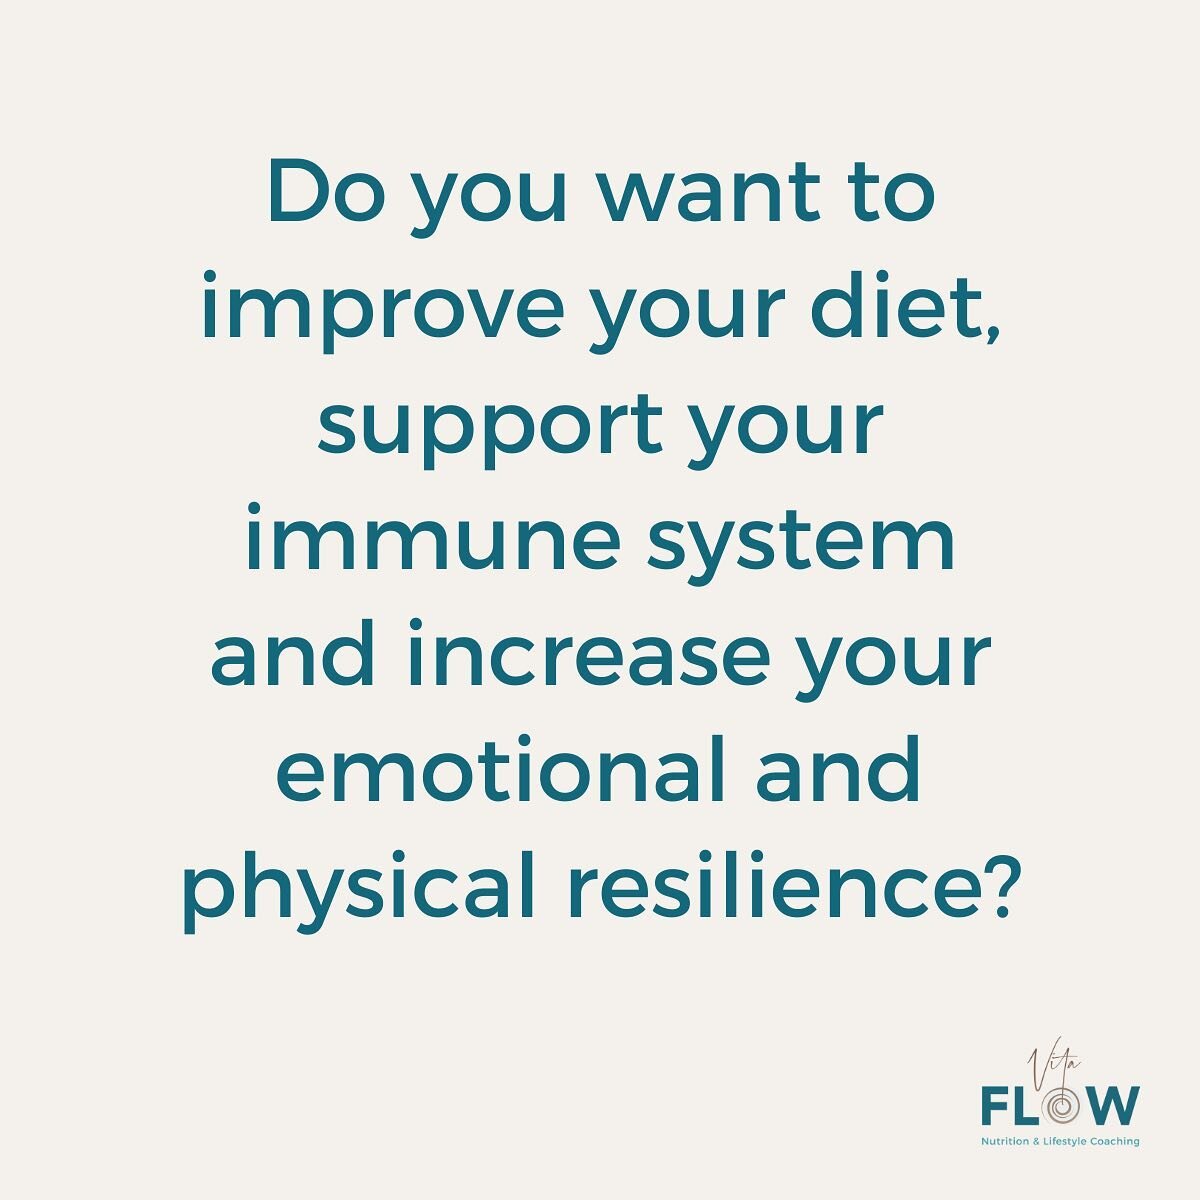 With the Vitaflow concept i have lots of practical ways to make small but highly effective changes to diet and lifestyle. 

If you want to engage fully in taking care of your health and putting your needs first, get in touch via the website or info@v